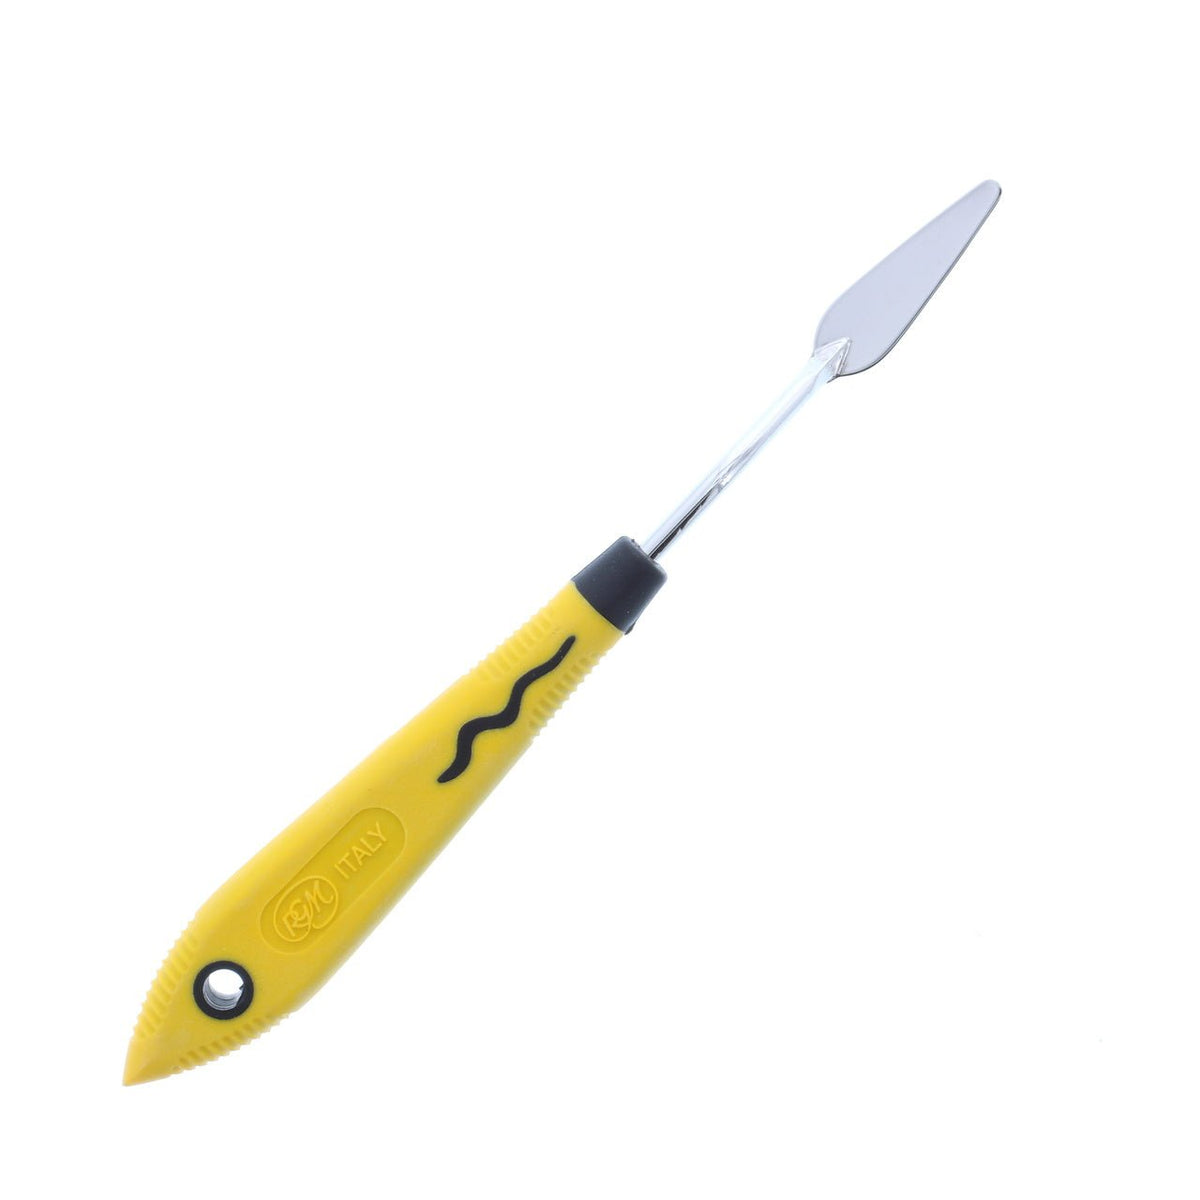 RGM Soft Grip Painting Knife #002 (Yellow Handle) - merriartist.com